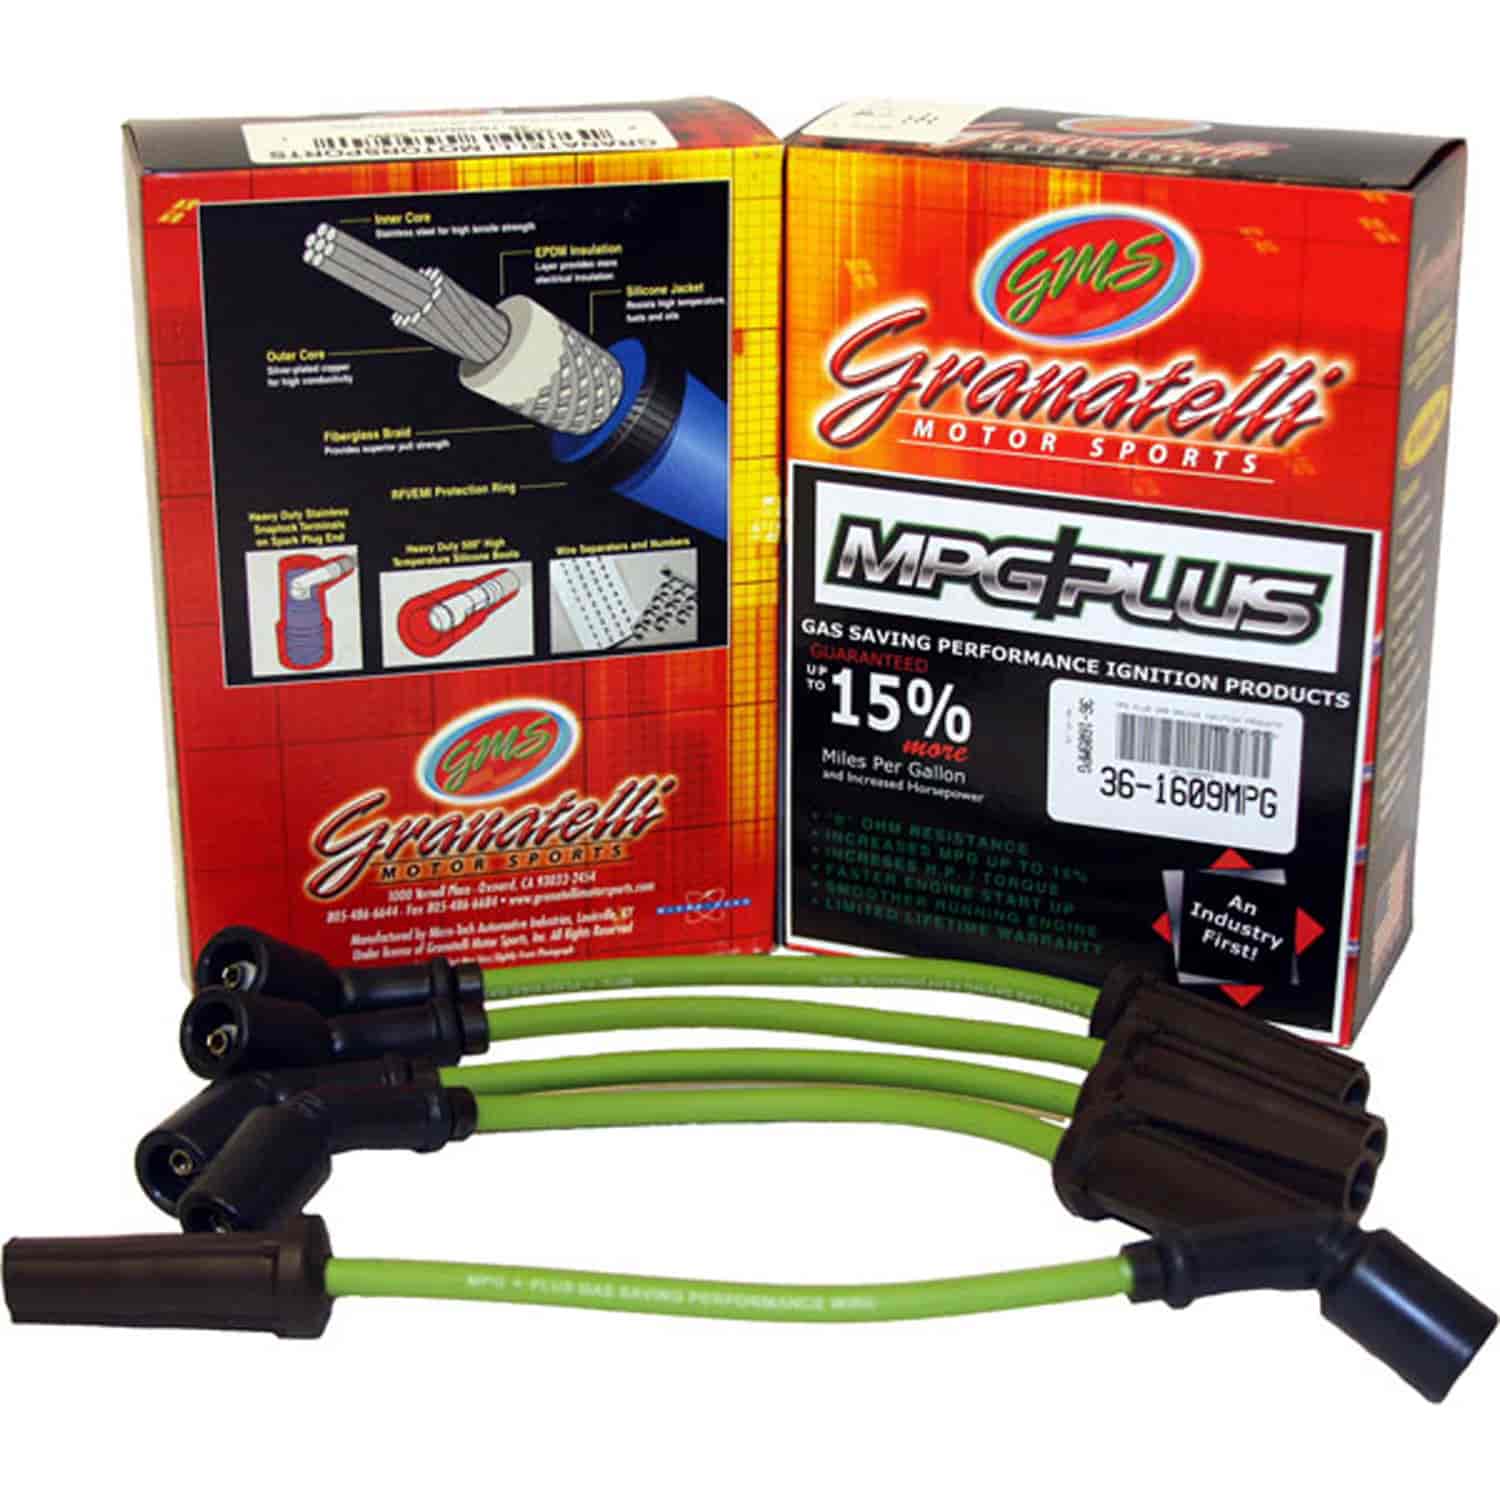 MPG Wires TOYOTA 4 RUNNER 4CYL 2.4L 93-96